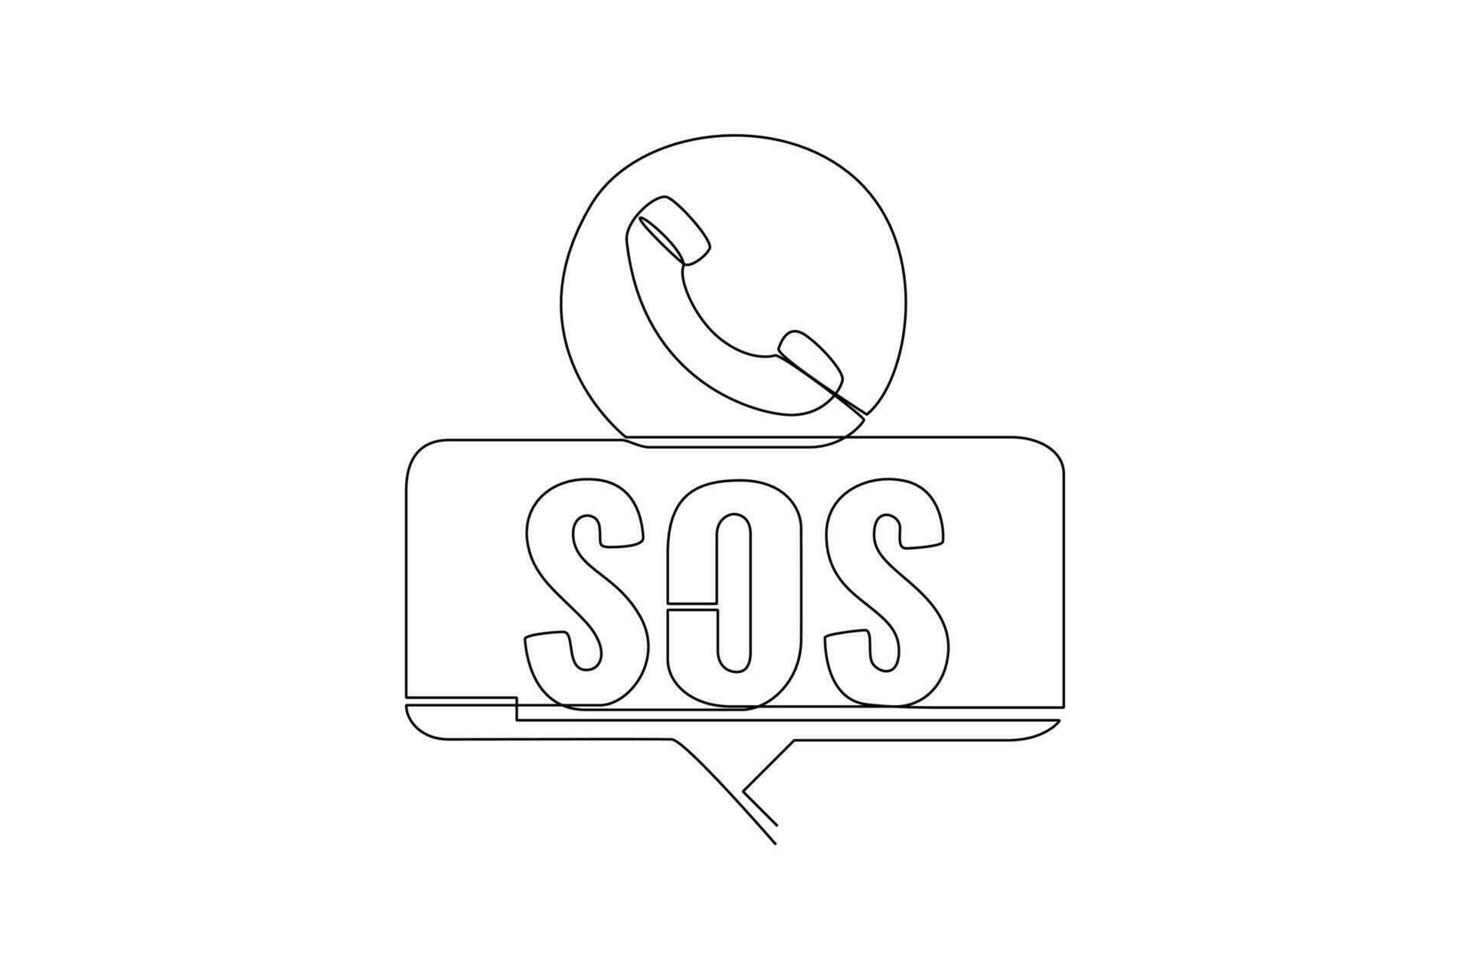 Continuous one-line drawing emergency SOS calls. Emergency SOS concept. Single line drawing design graphic vector illustration